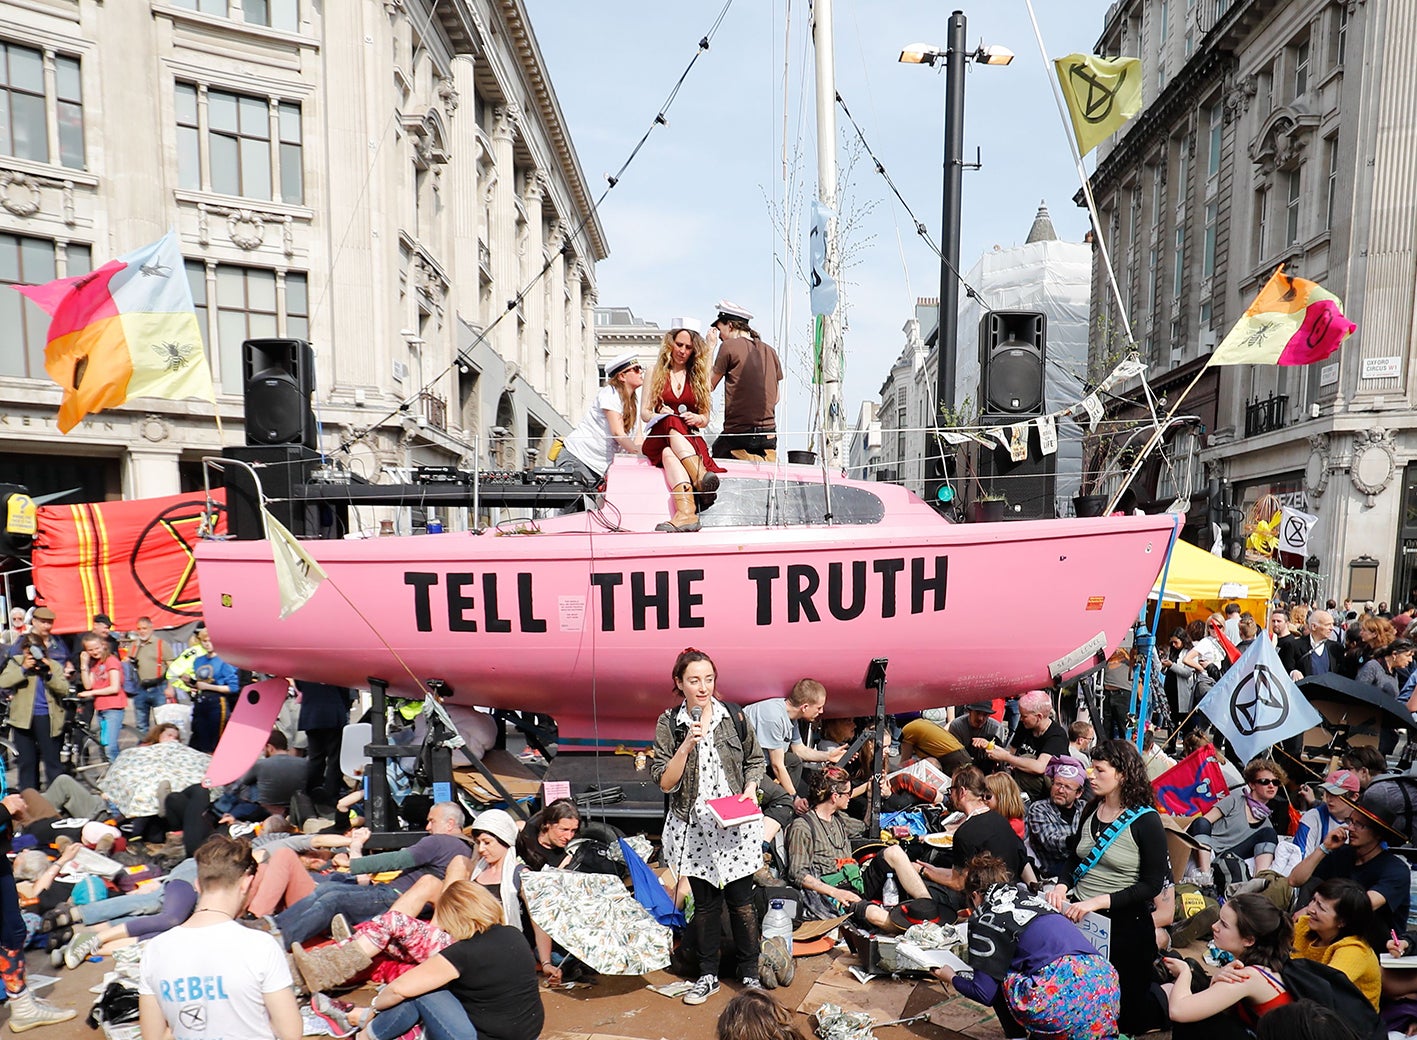 Love or loathe it, Extinction Rebellion is more necessary than ever